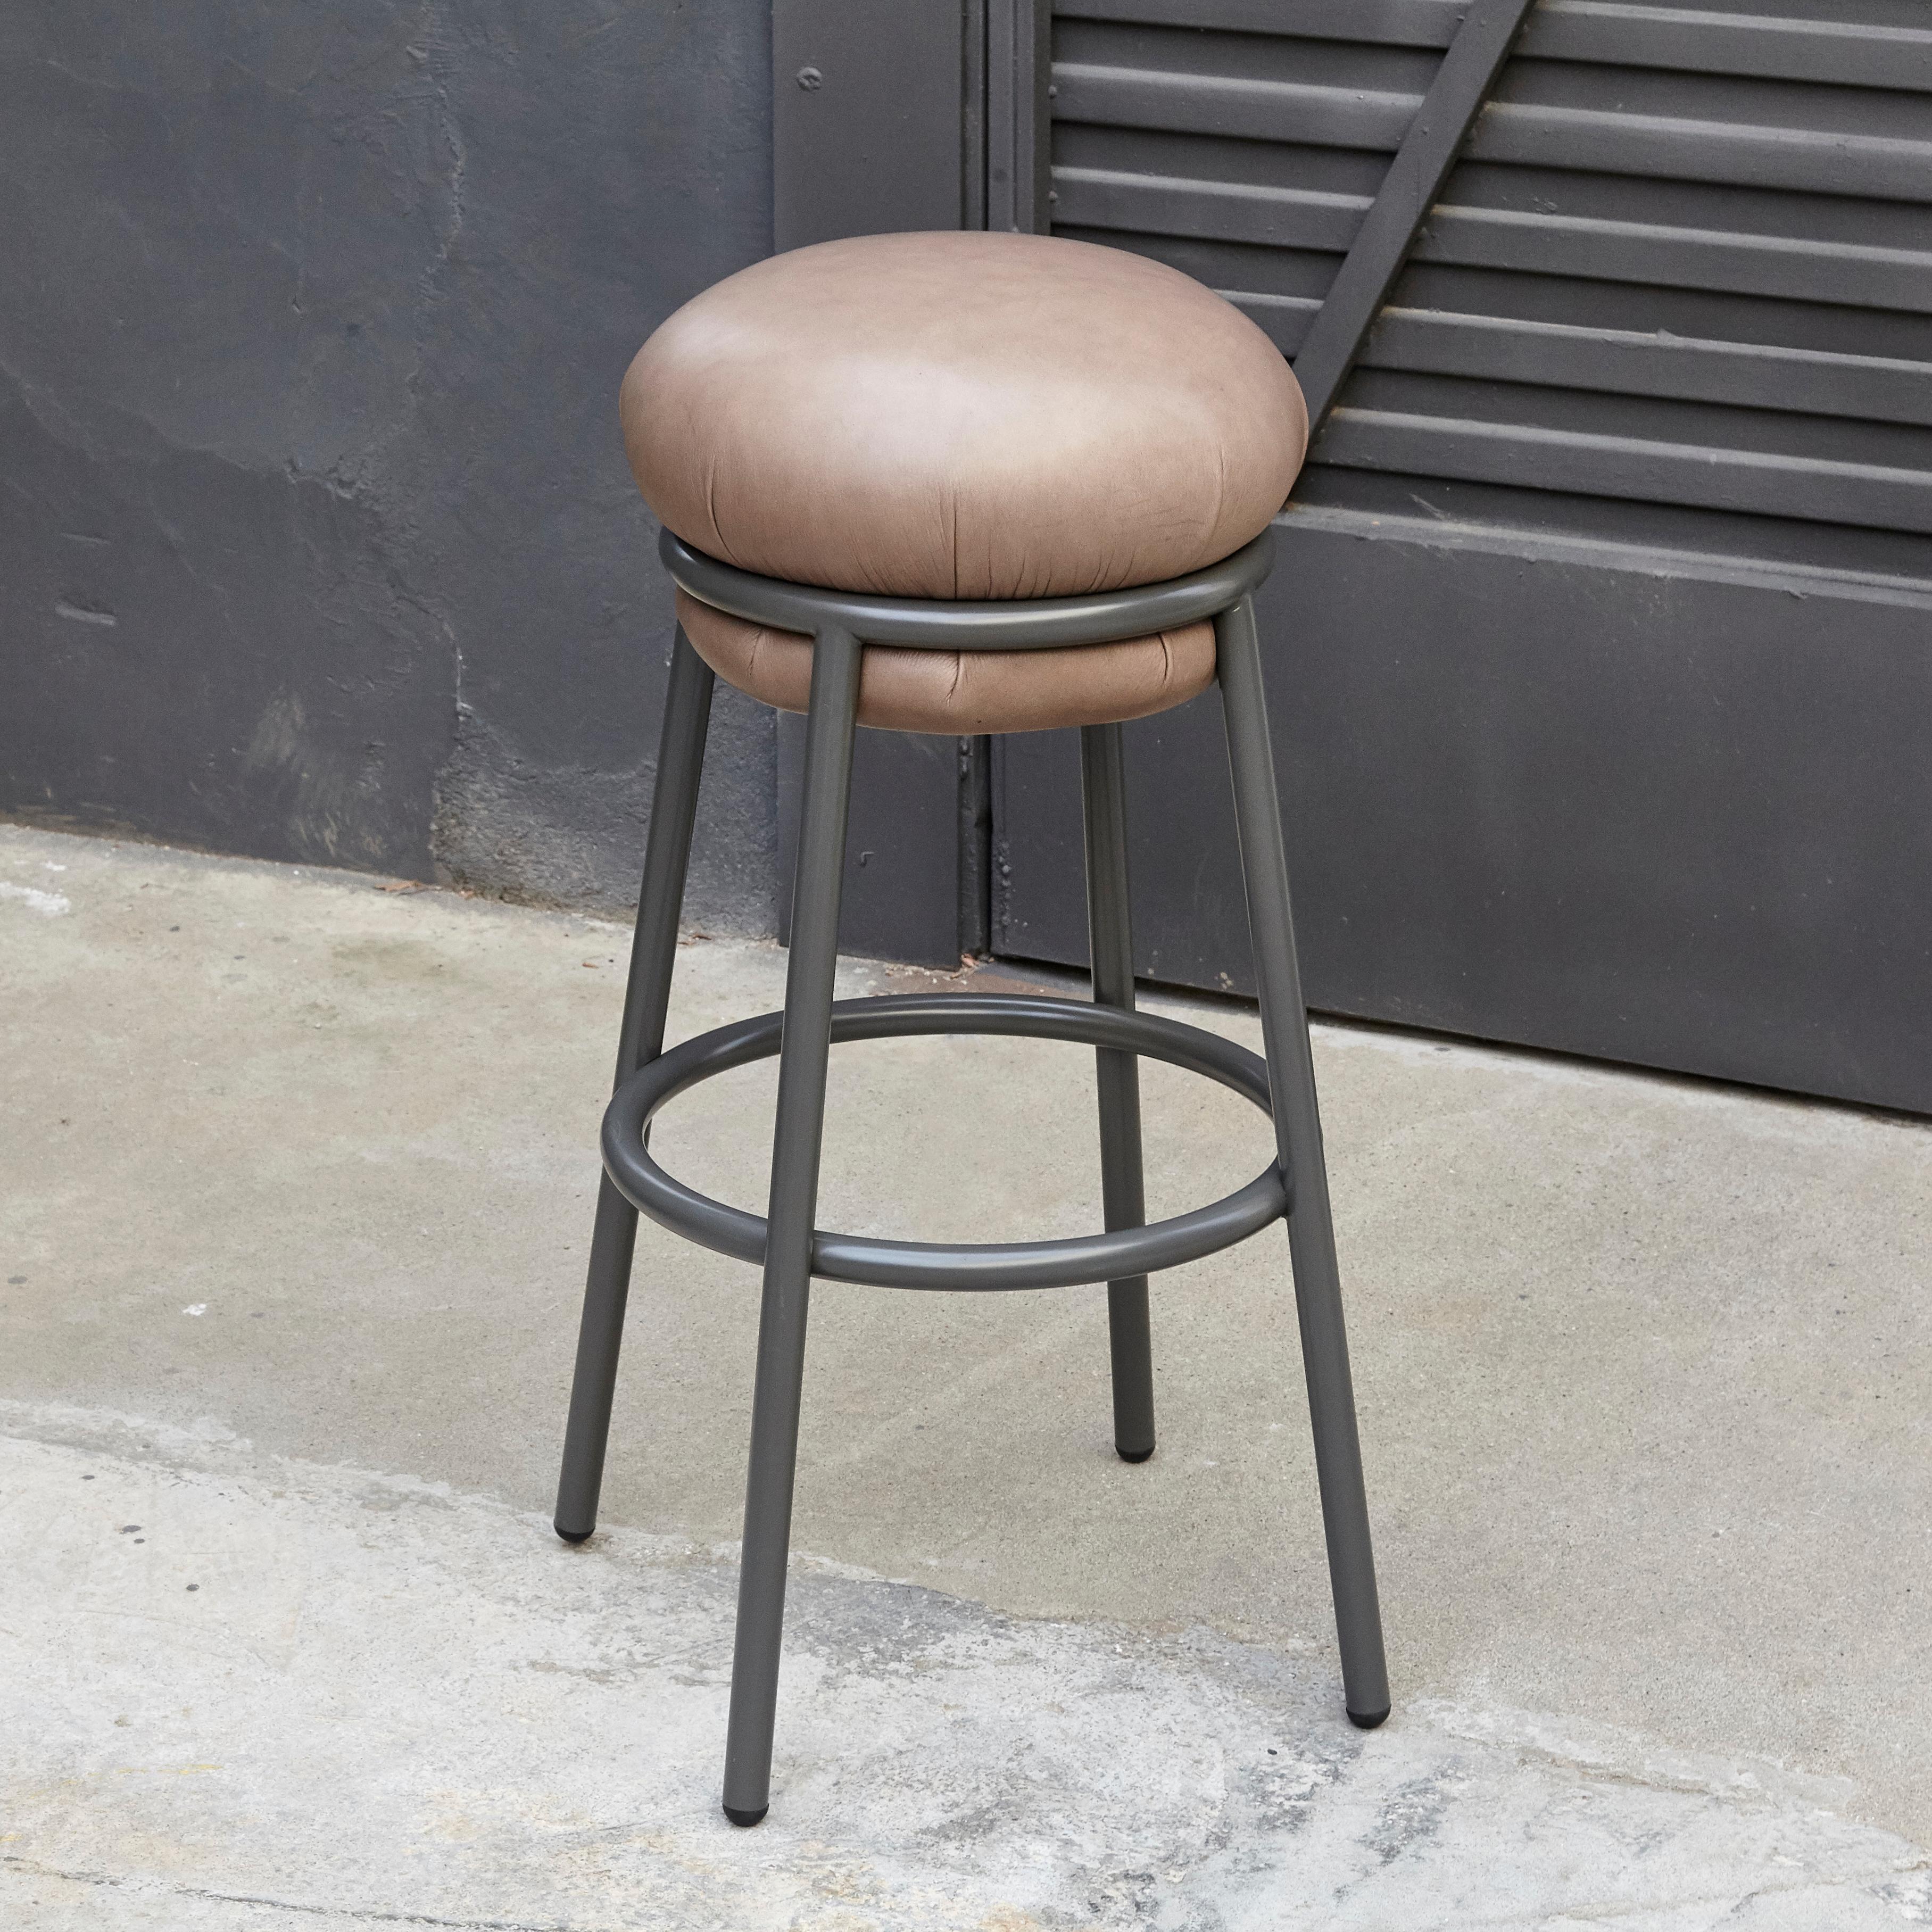 Organic Modern Grasso Contemporary Leather and Lacquered Metal Stool by Stephen Burks in Brown